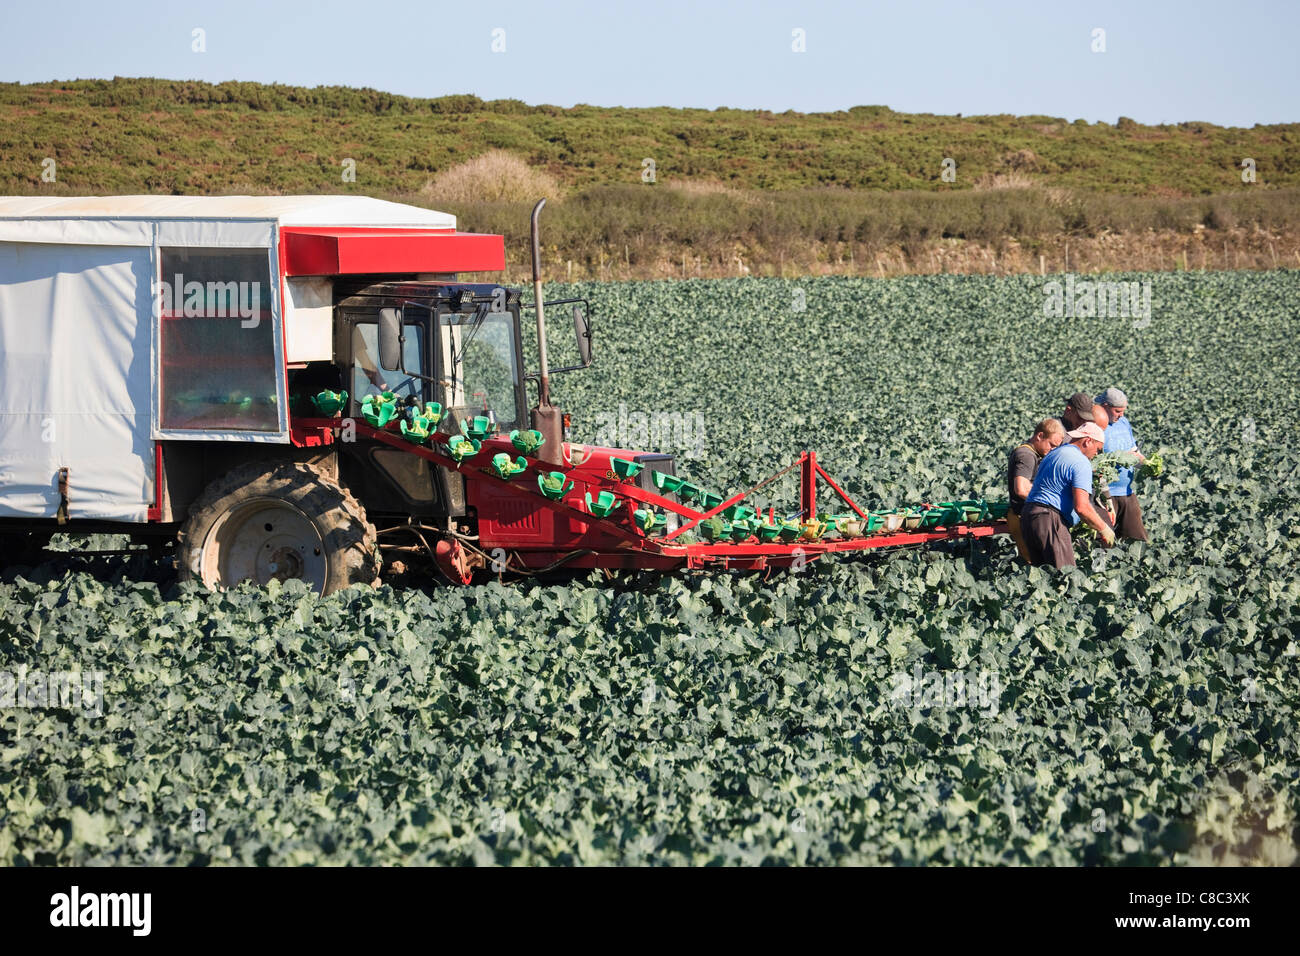 England UK Farm workers harvesting broccoli in a field with a conveyor belt harvester loading them onto a tractor and trailer Stock Photo